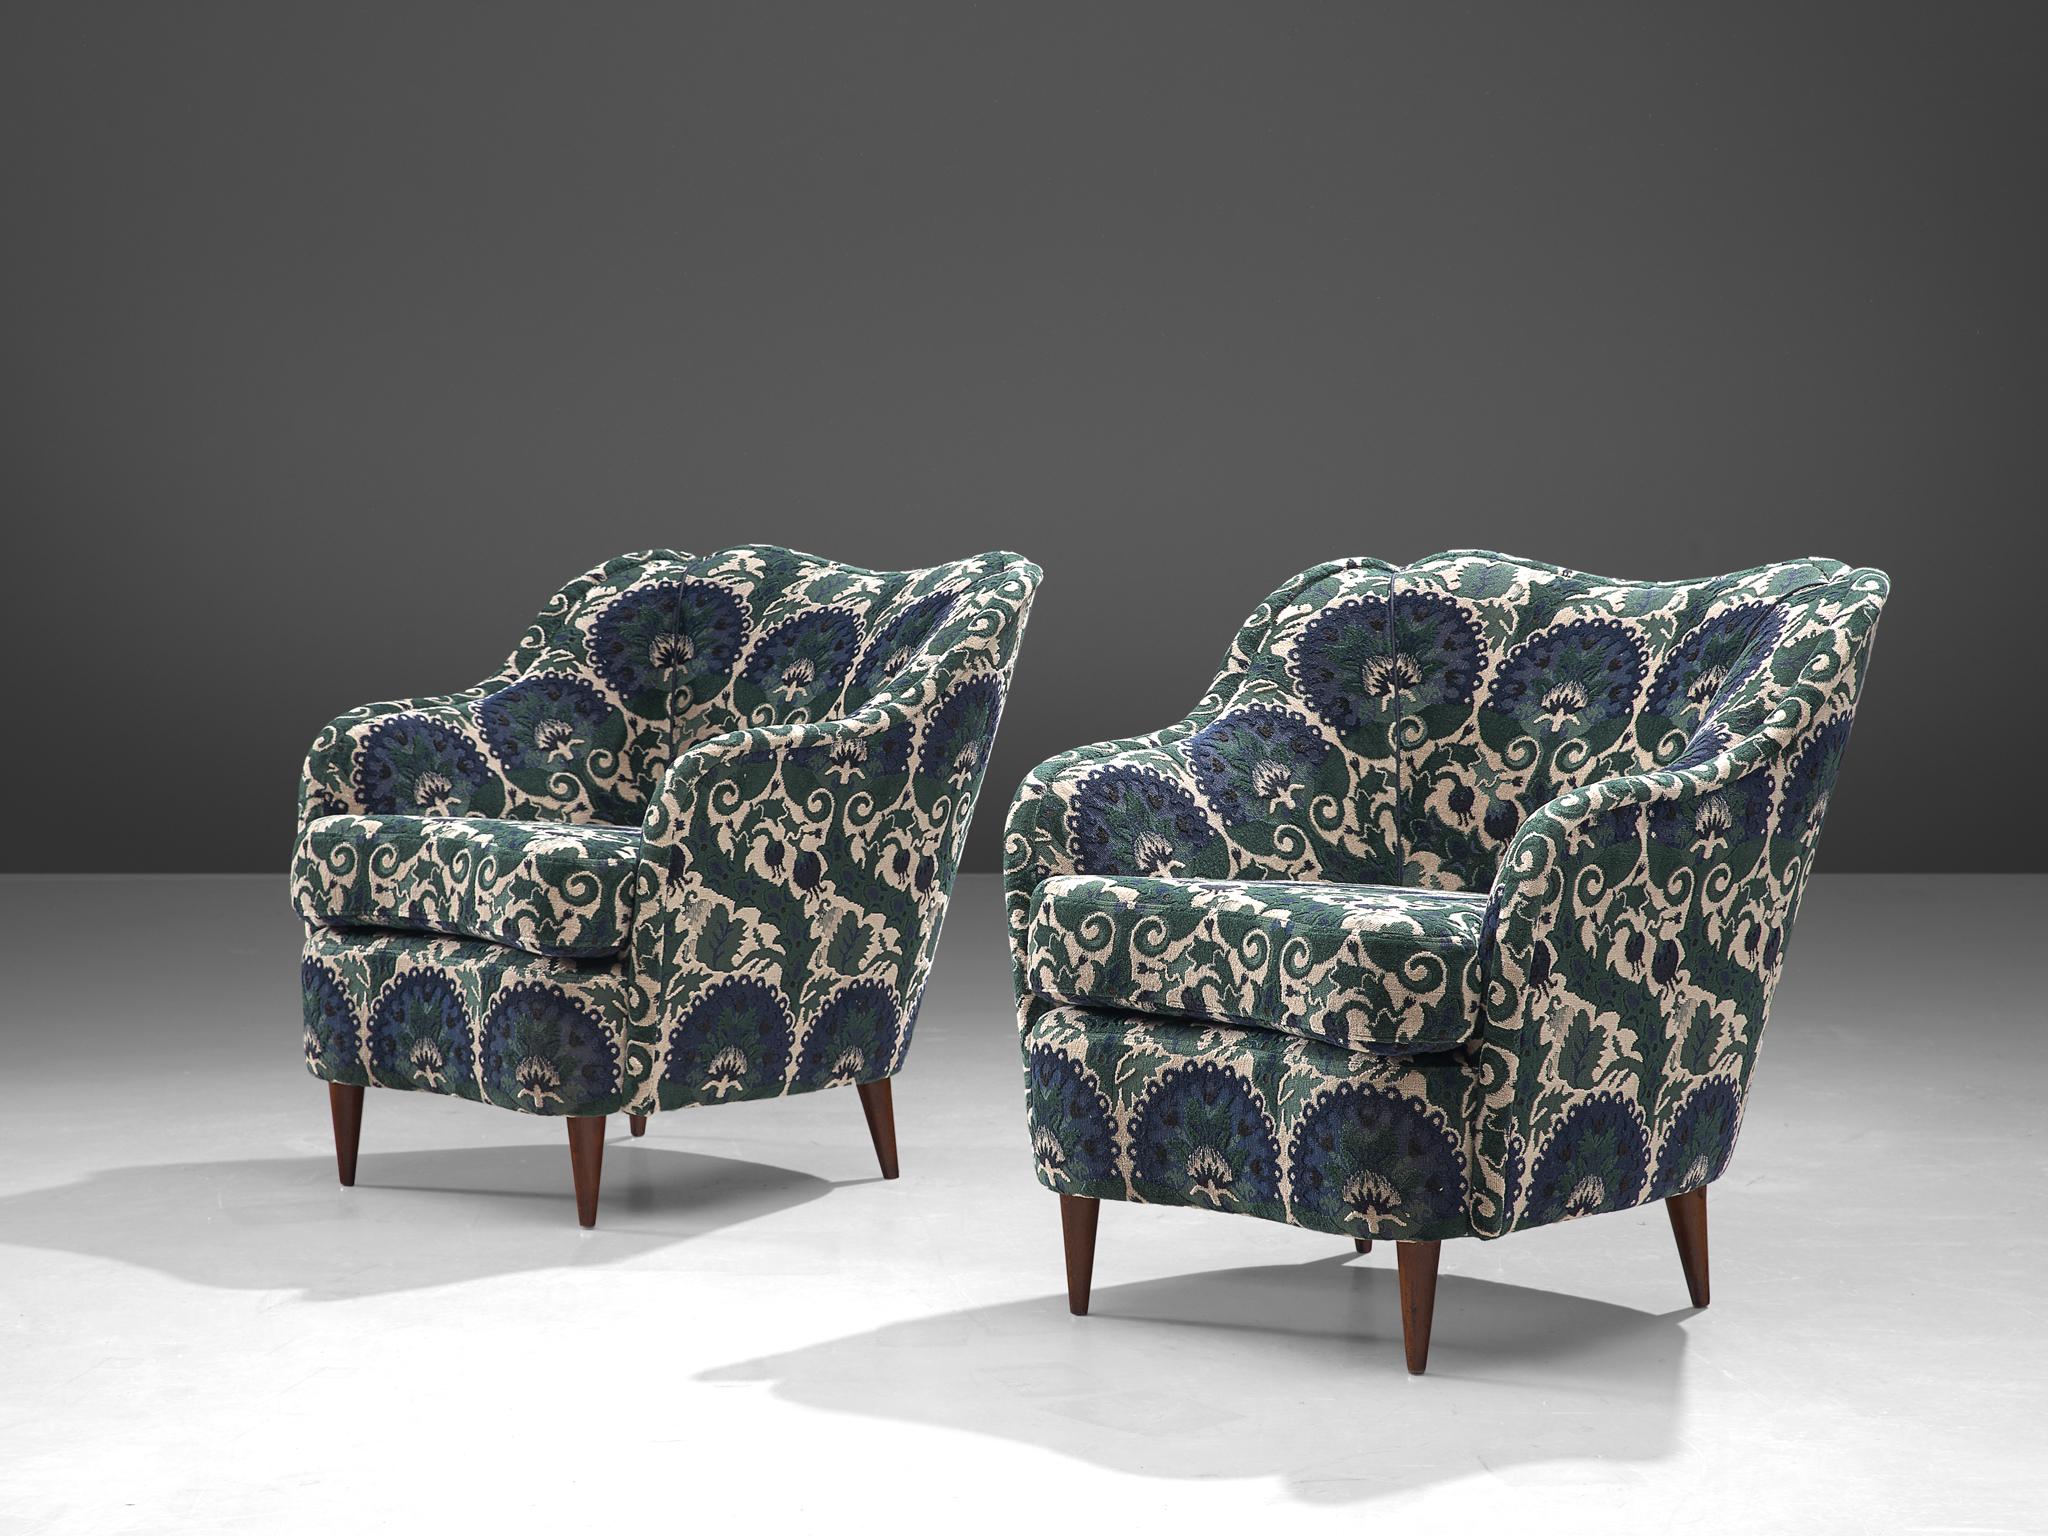 Mid-Century Modern Pair of Lounge Chairs in ZAK+FOX ‘Fantasma’ Collection 2020 Upholstery